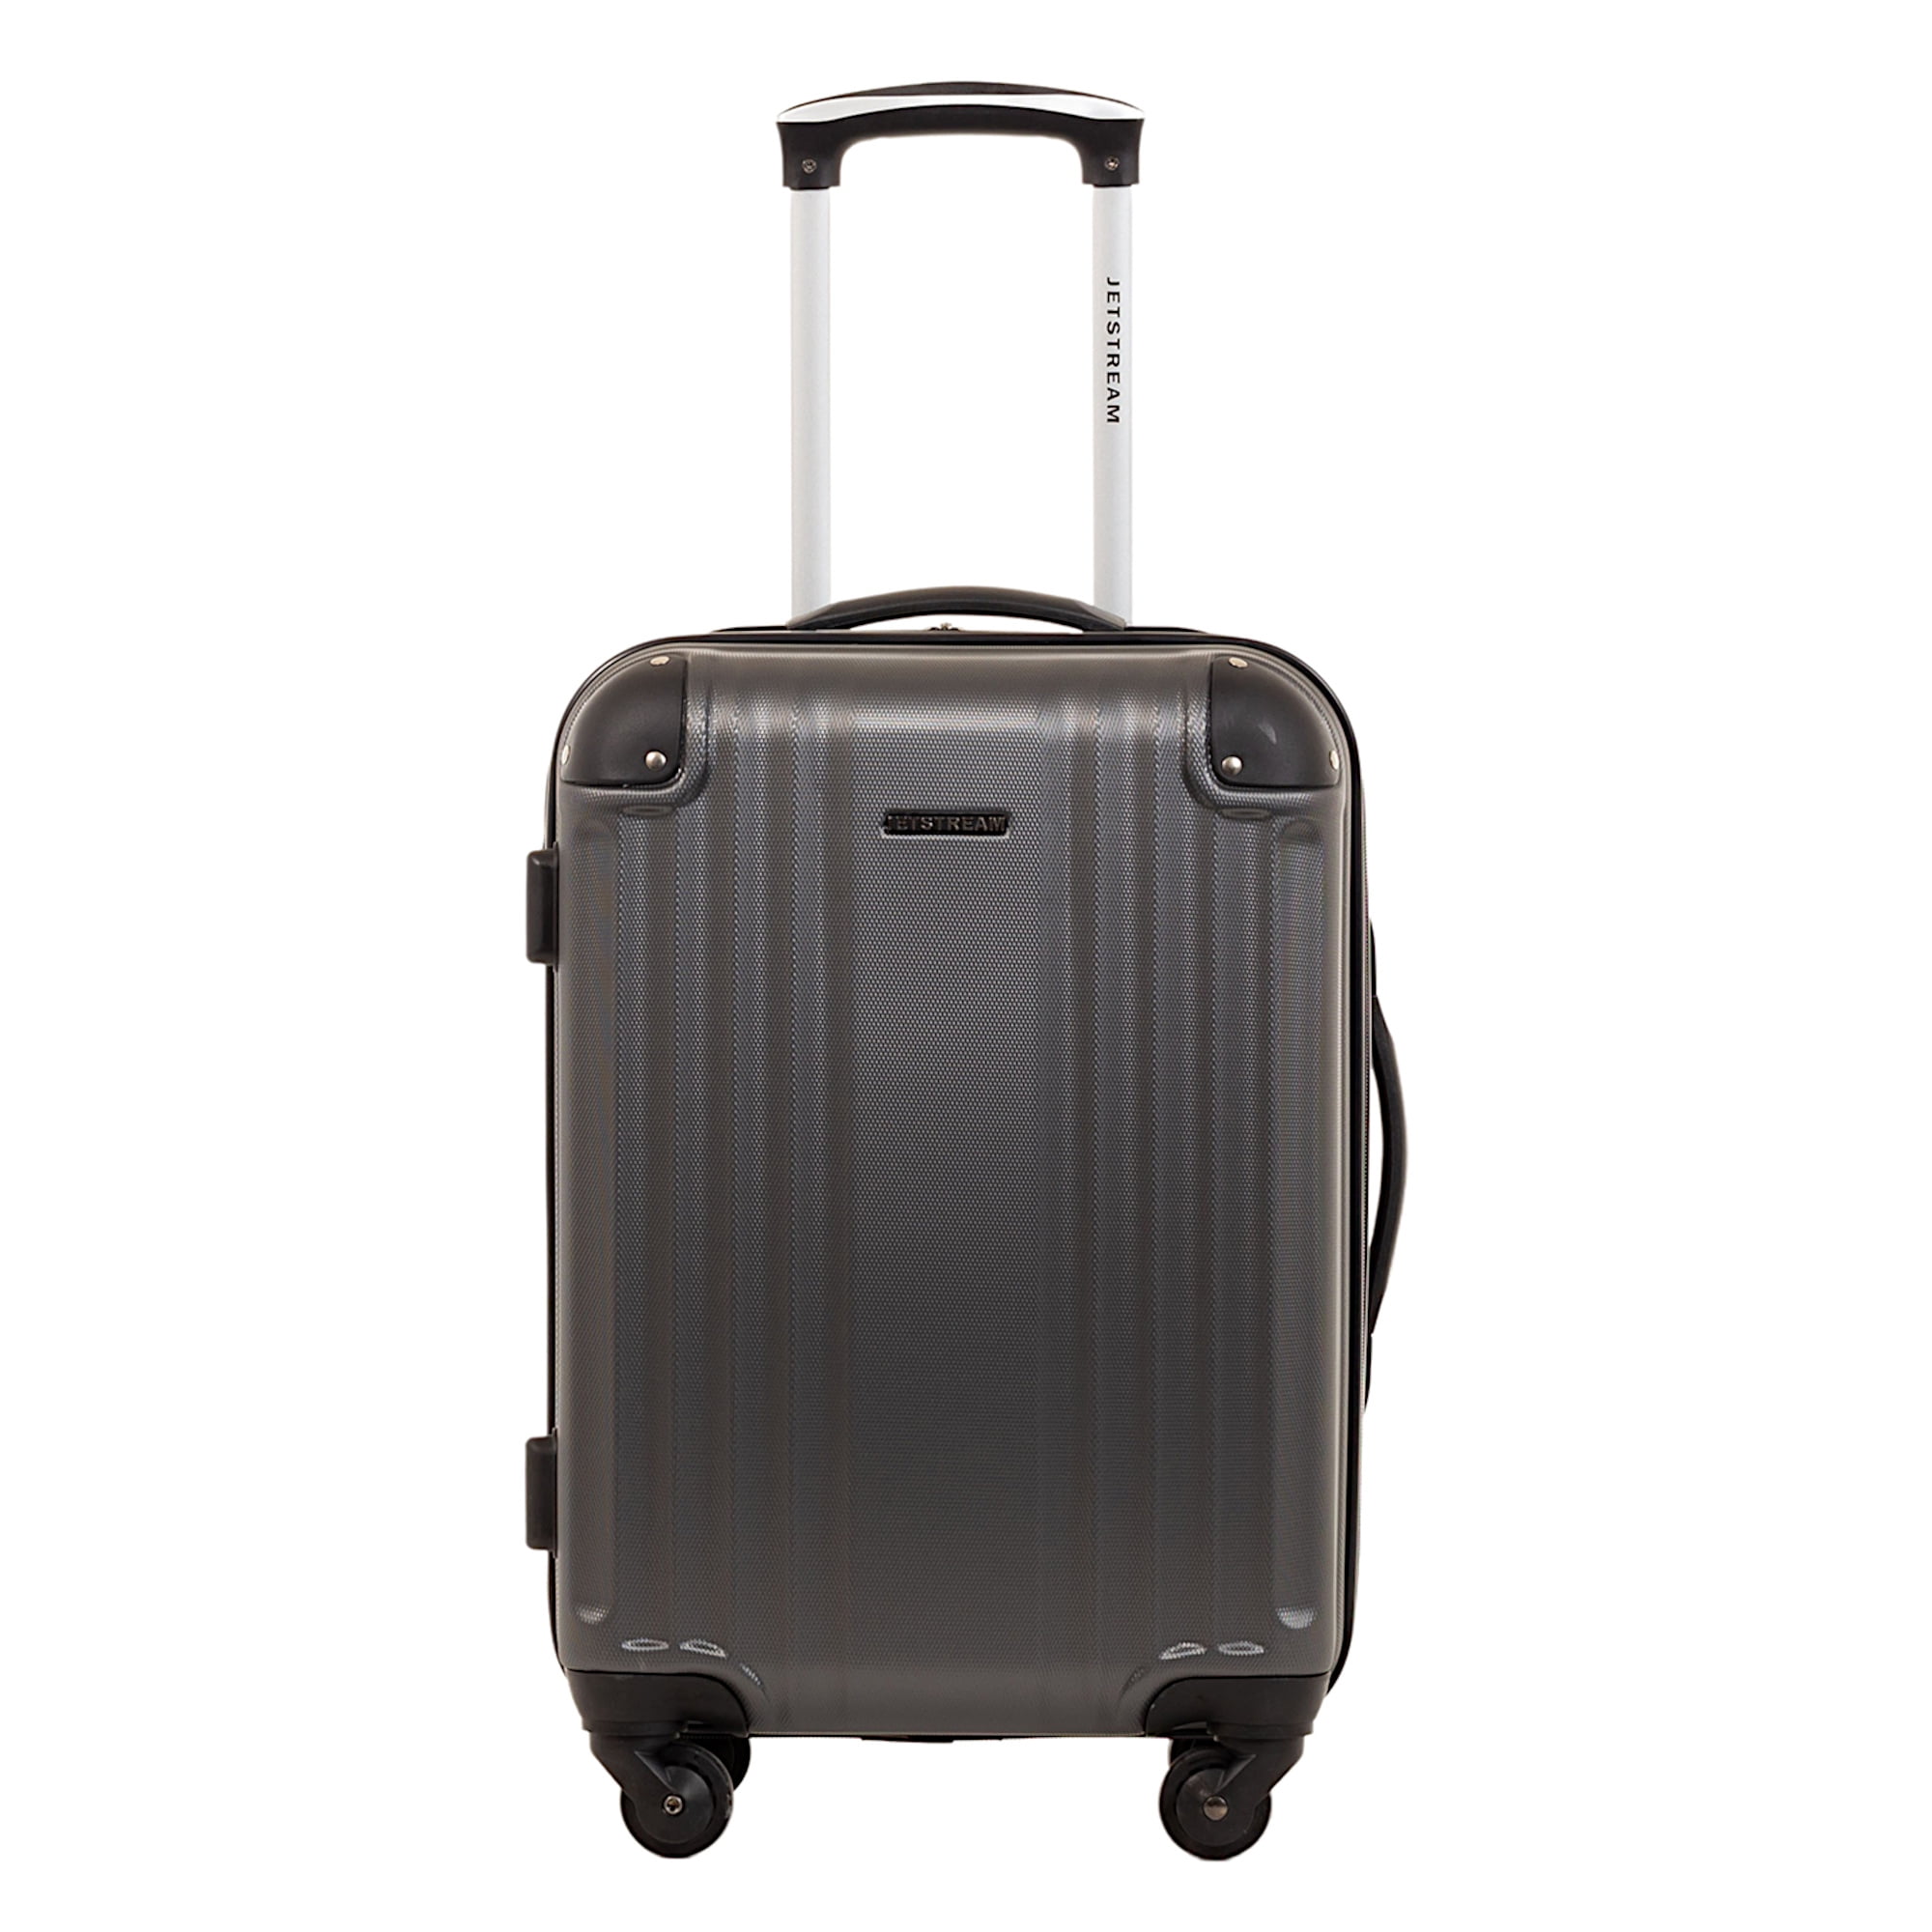 Canada 20 inch Charcoal Lightweight Hard Side Wheeled Suitcase